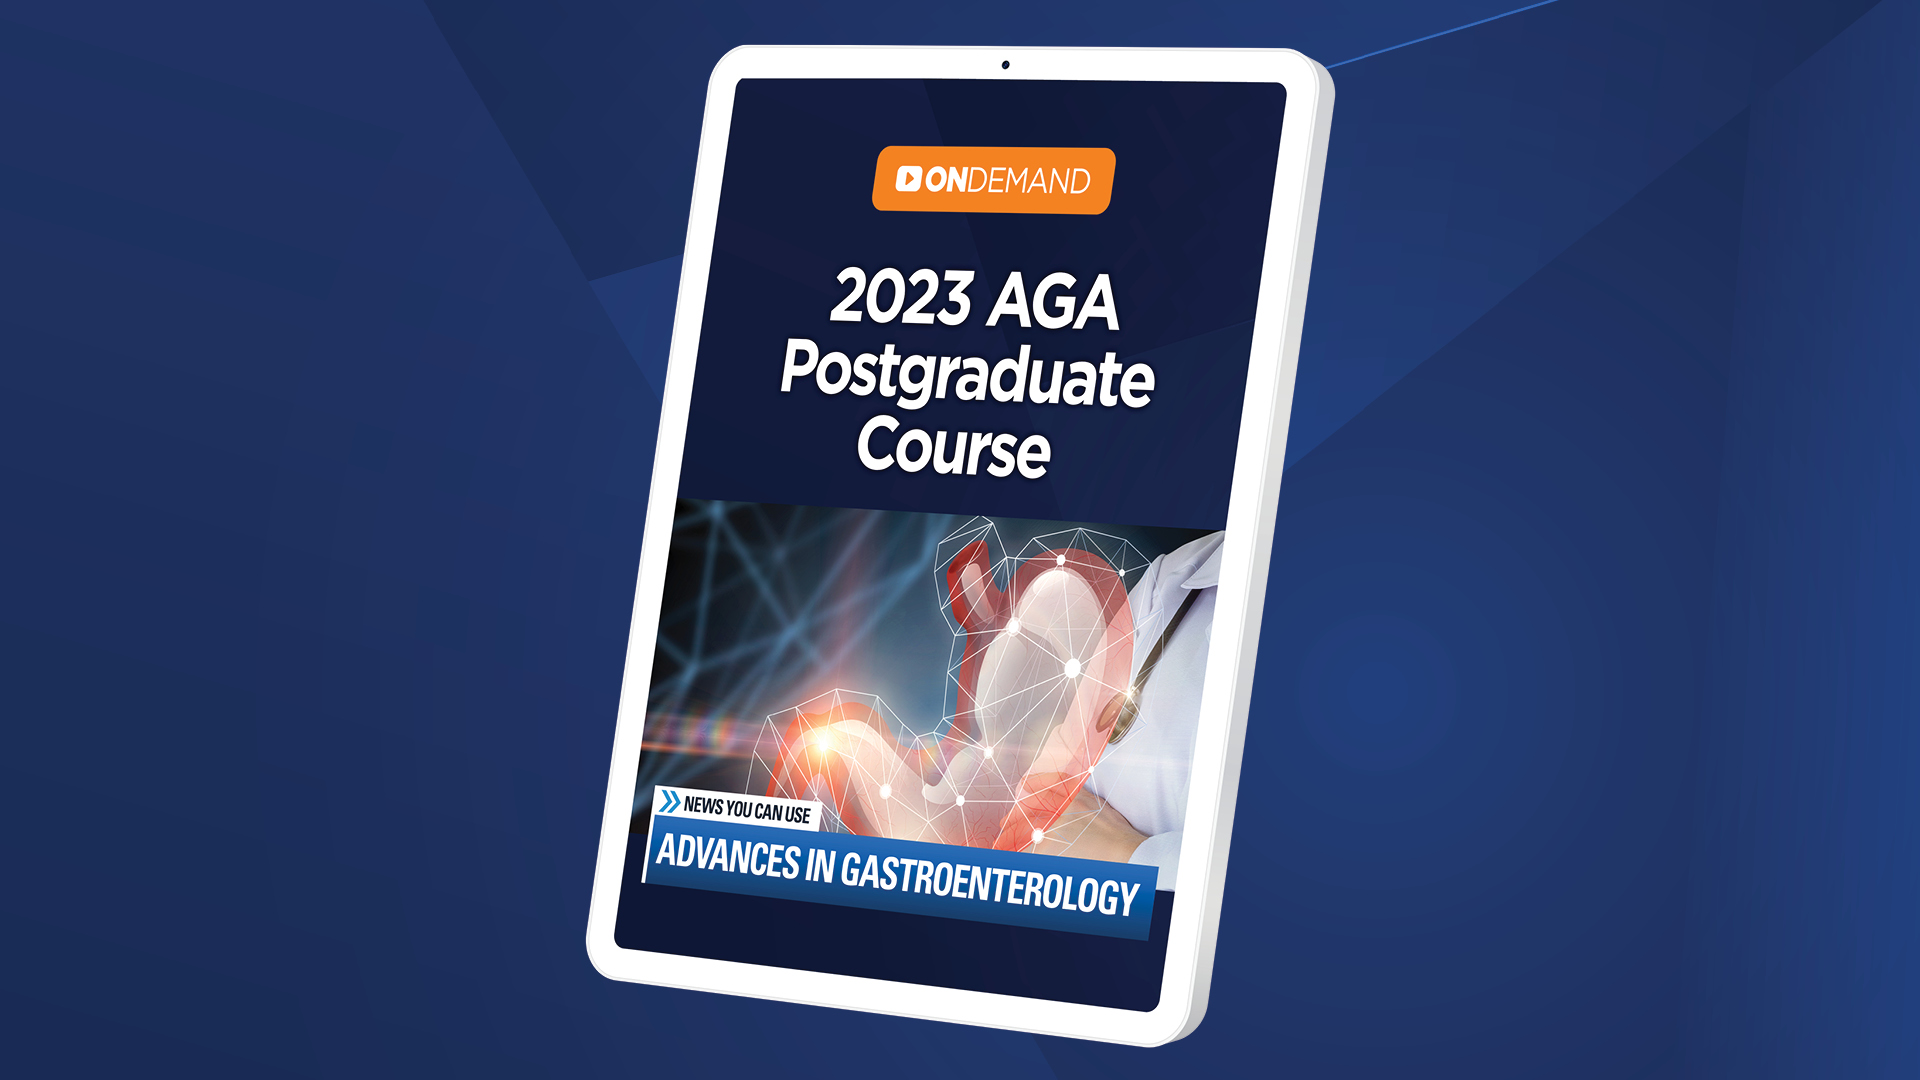 Missed the Postgraduate Course? We have you covered American